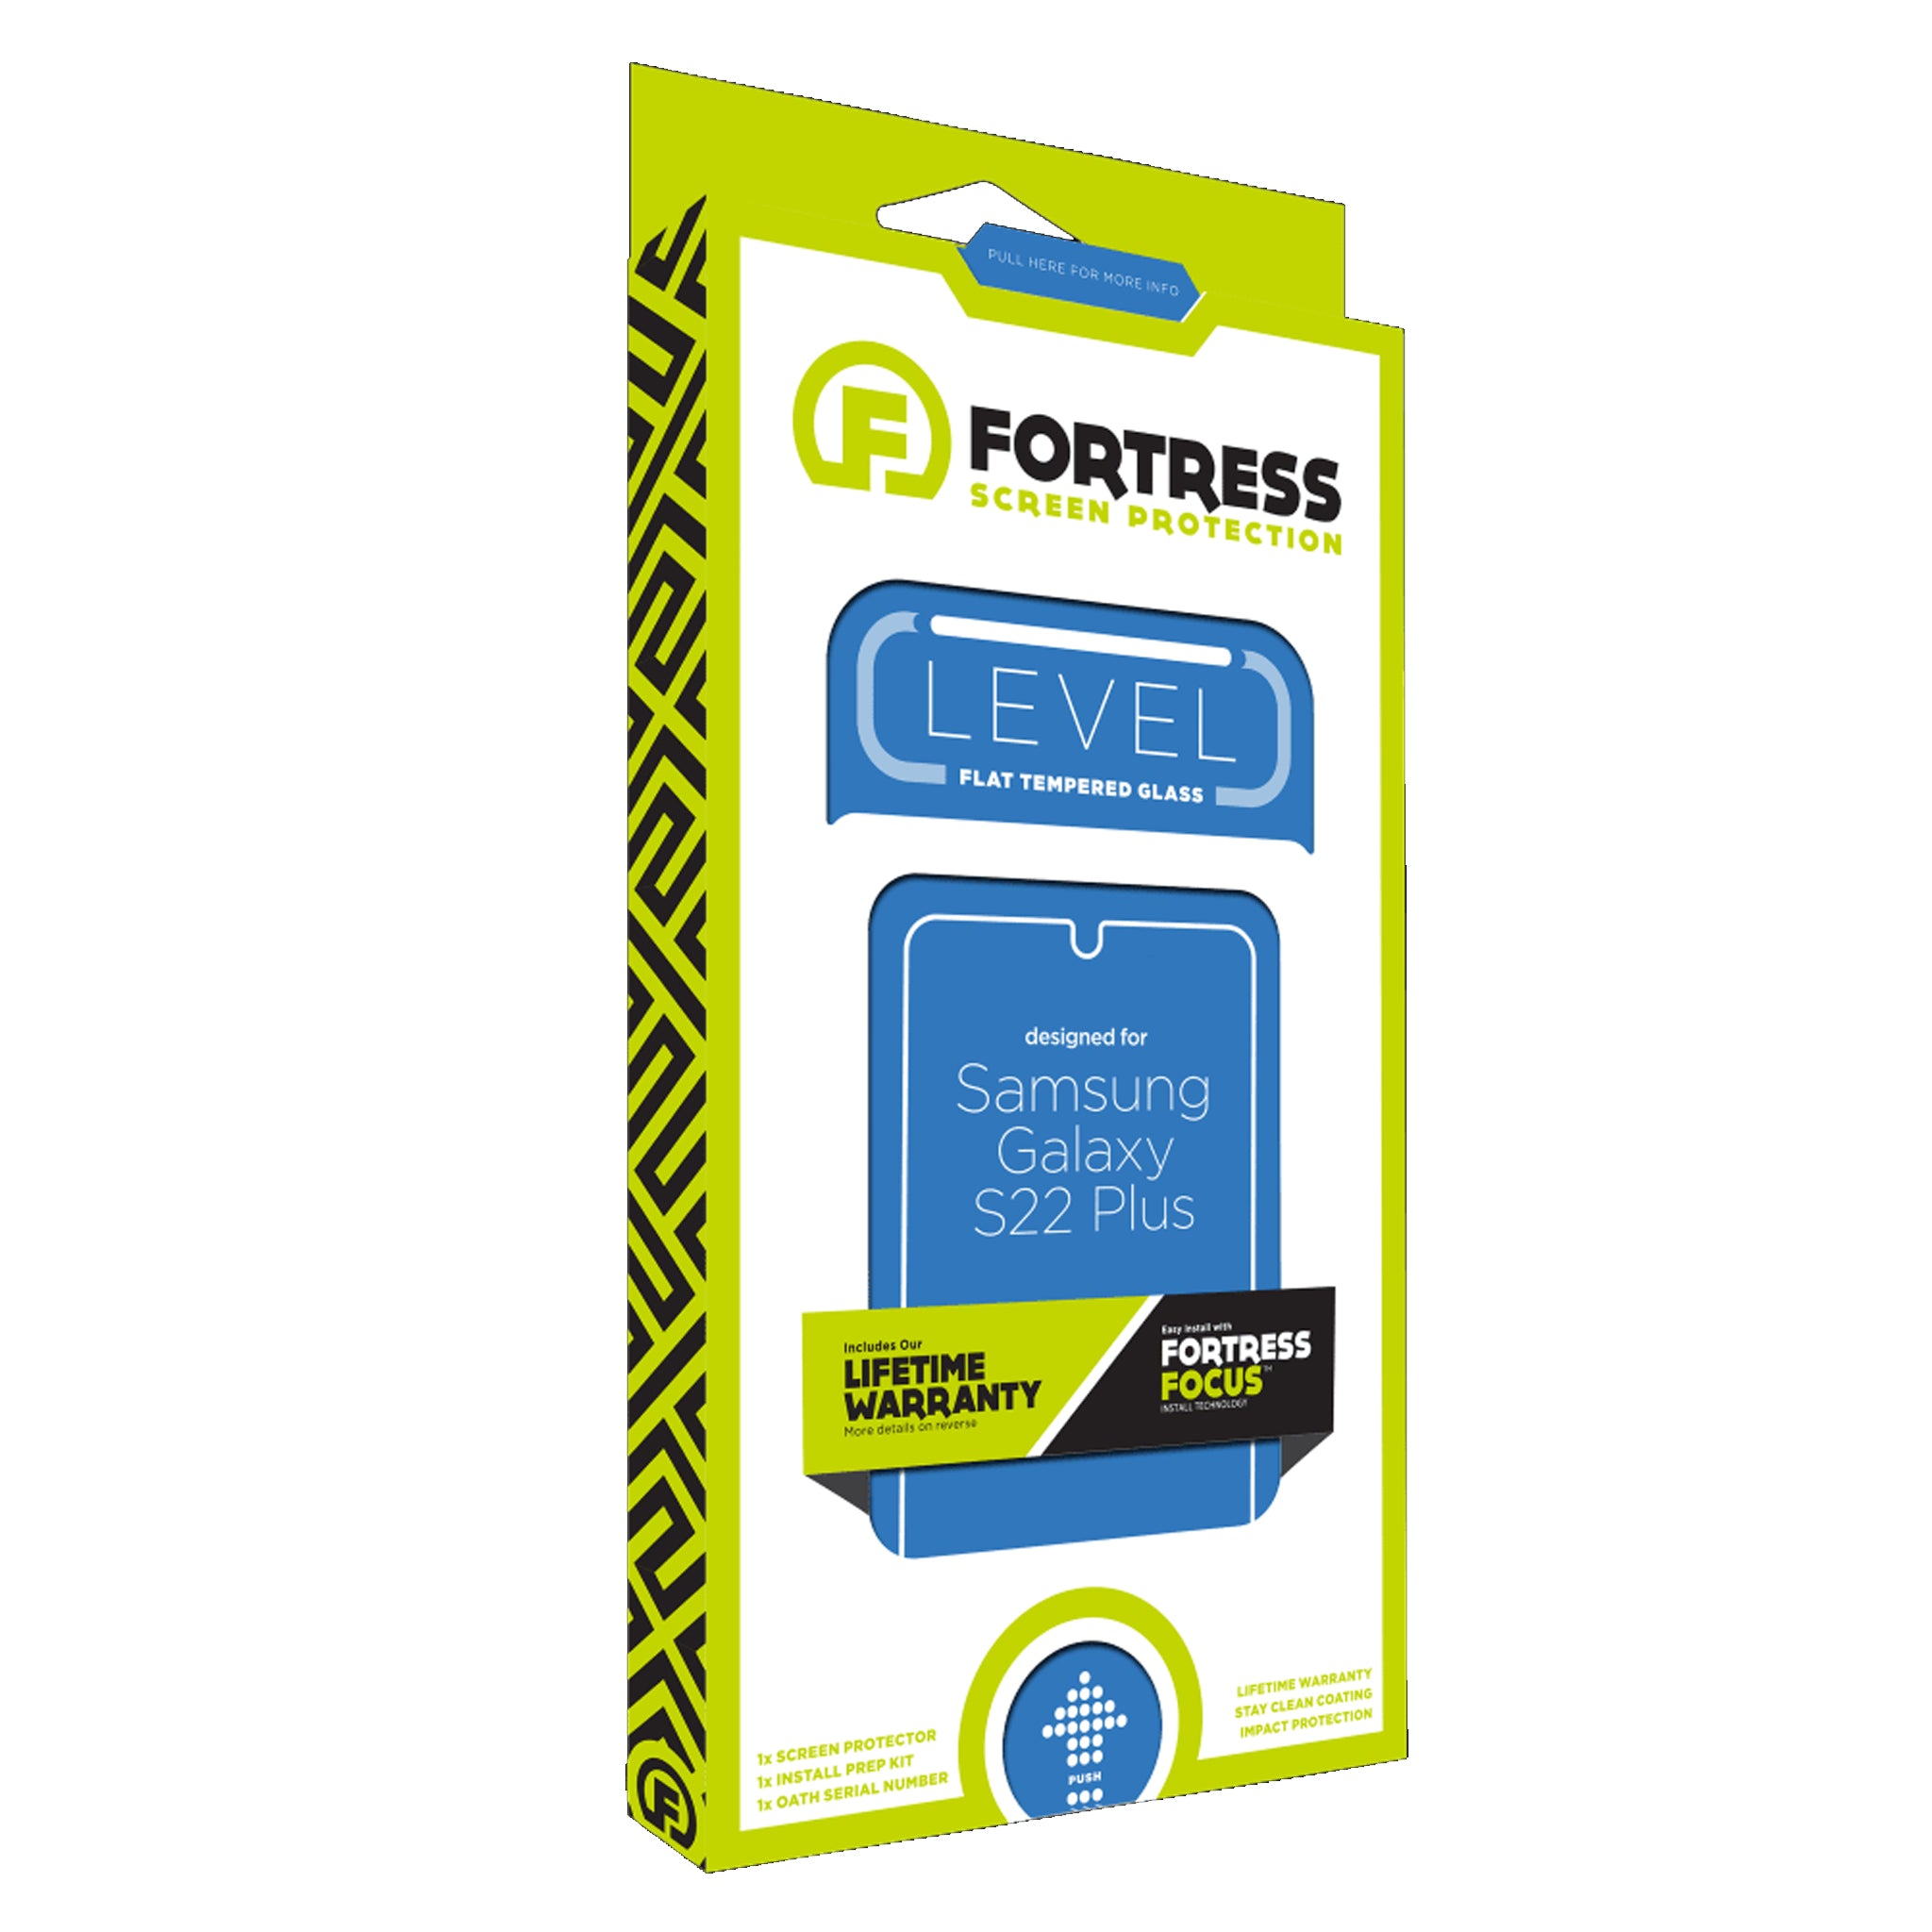 Fortress - Level Focus Glass Screen Protector For Samsung Galaxy S22 Plus - Clear